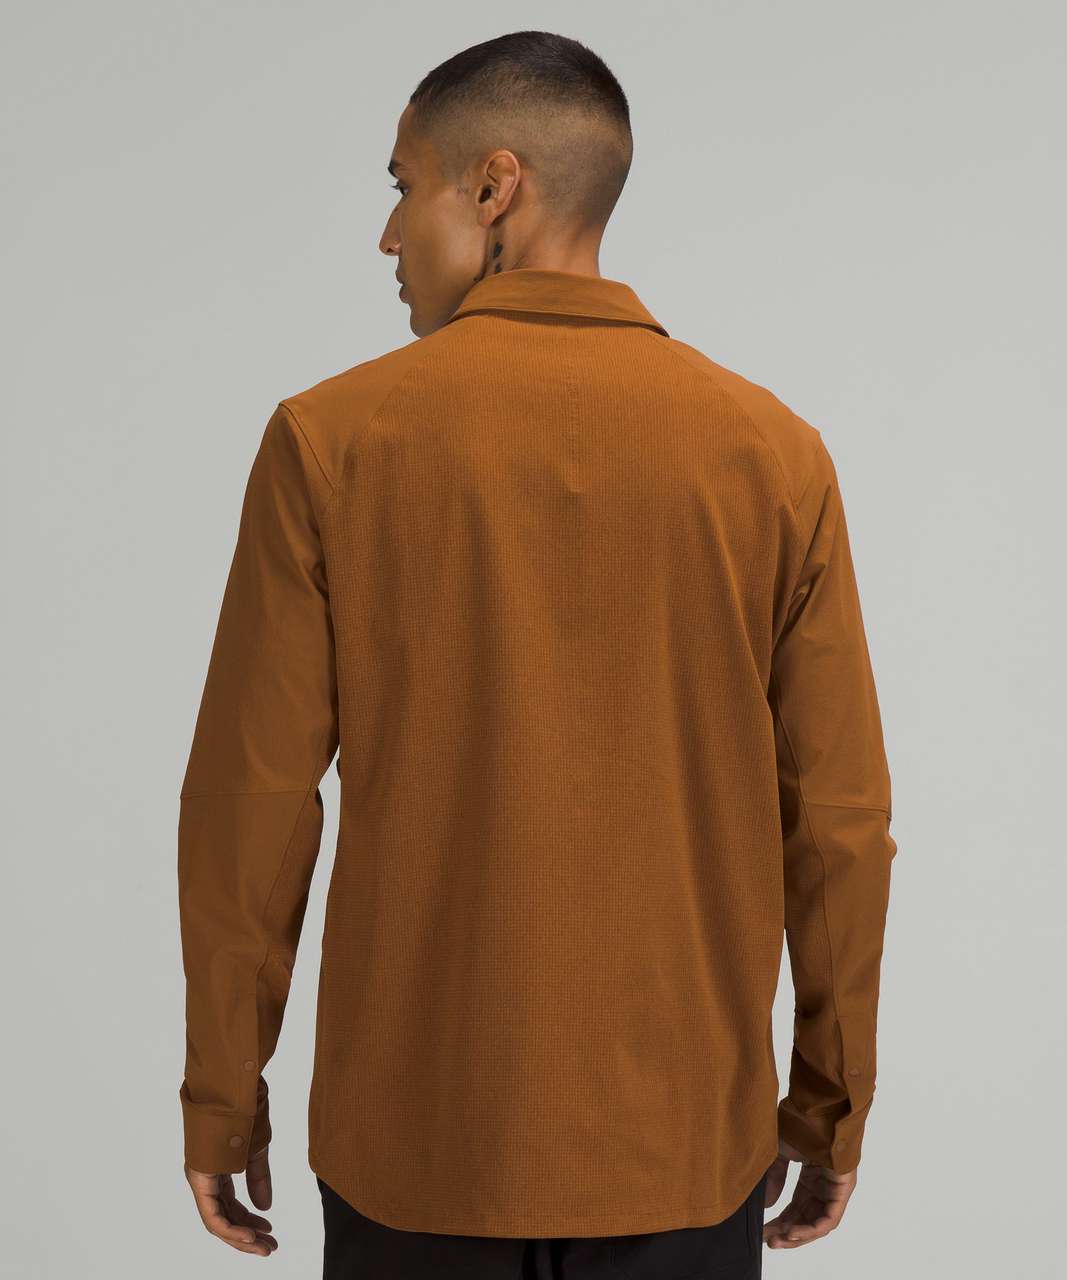 Copper Shirt with pocket